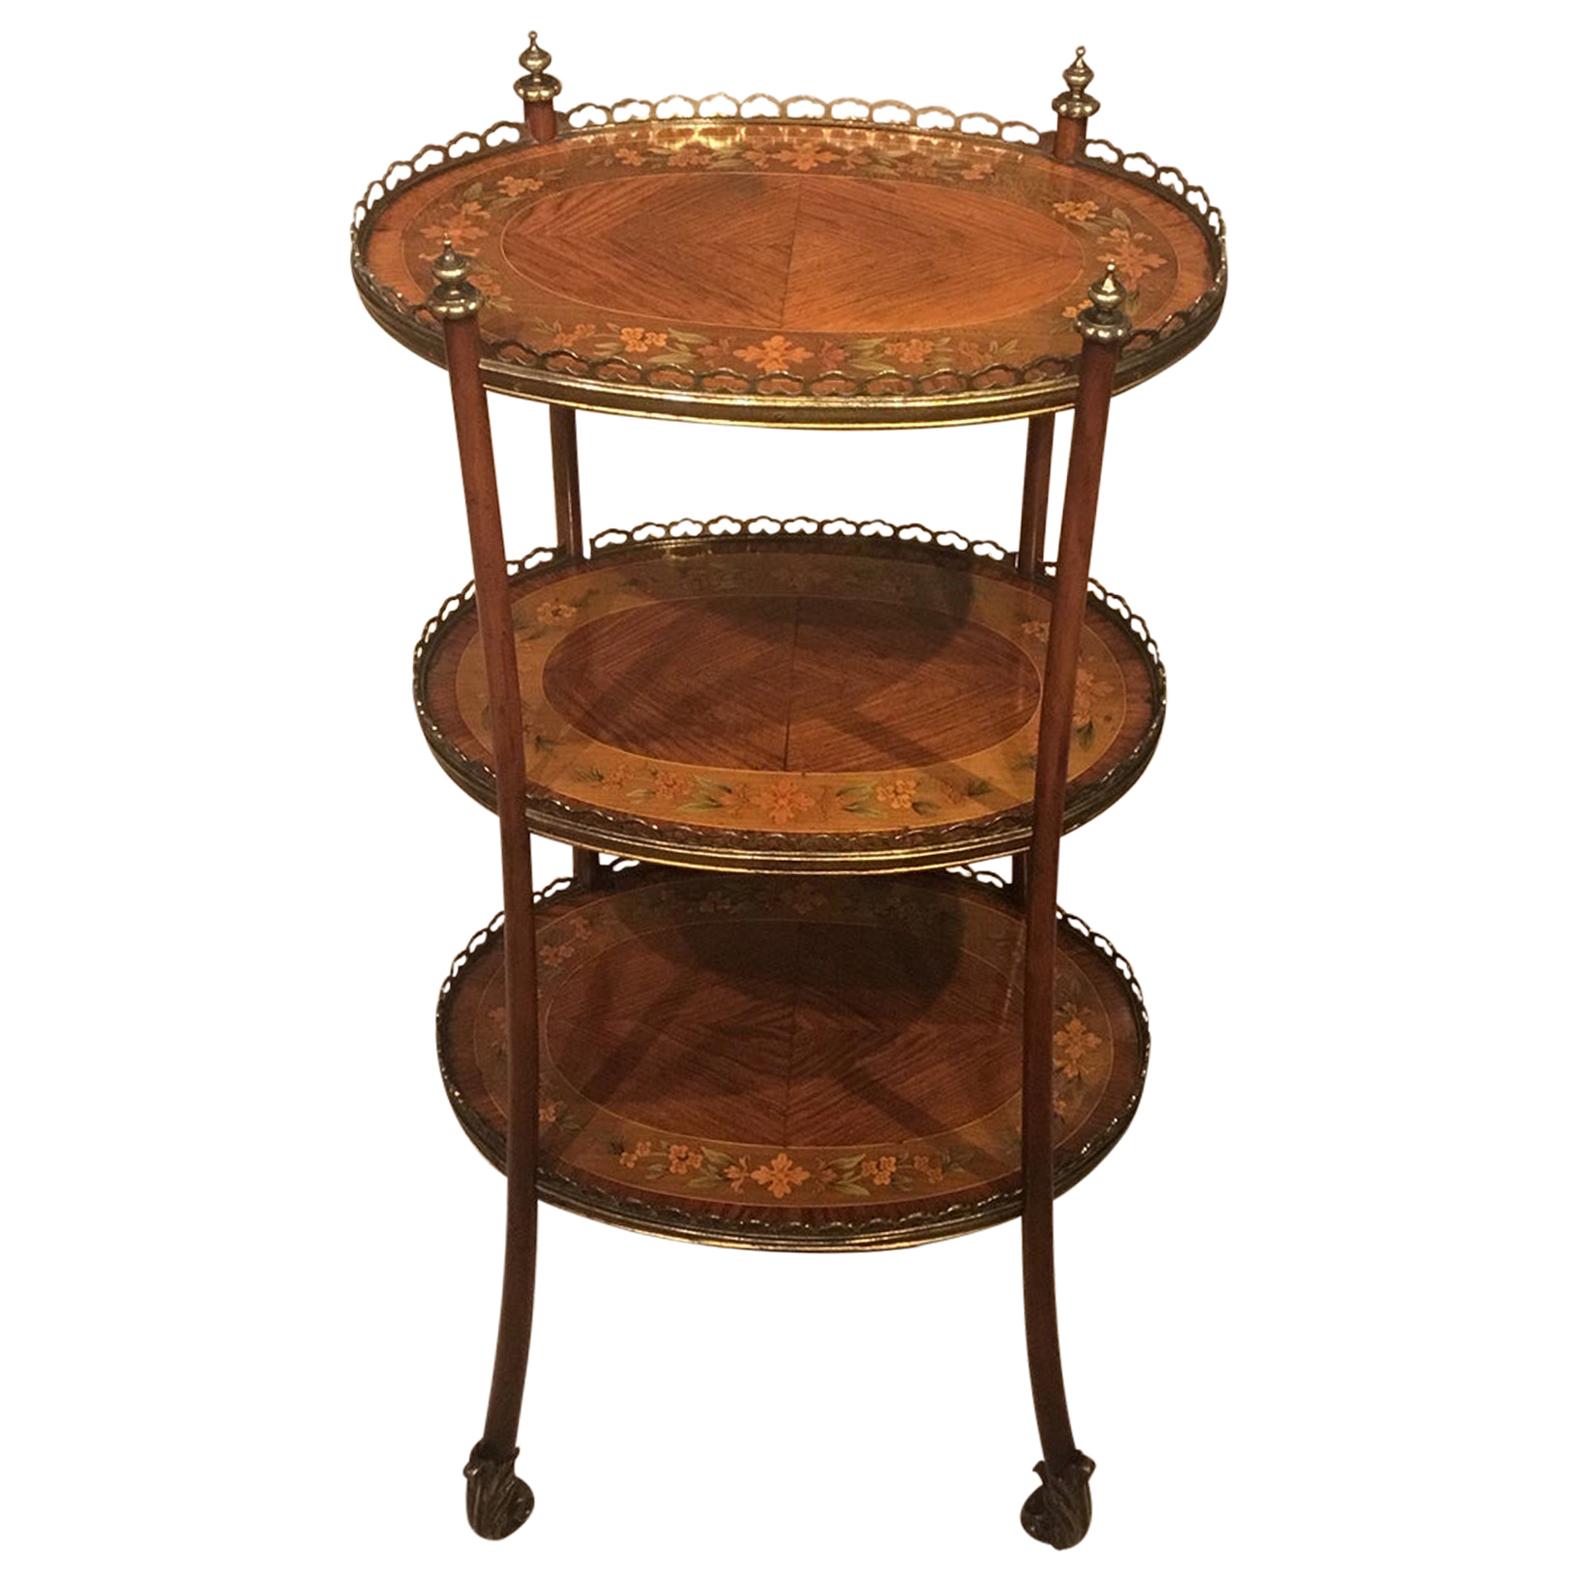 Edwardian Period Kingwood, Sycamore and Marquetry Inlaid Étagère For Sale